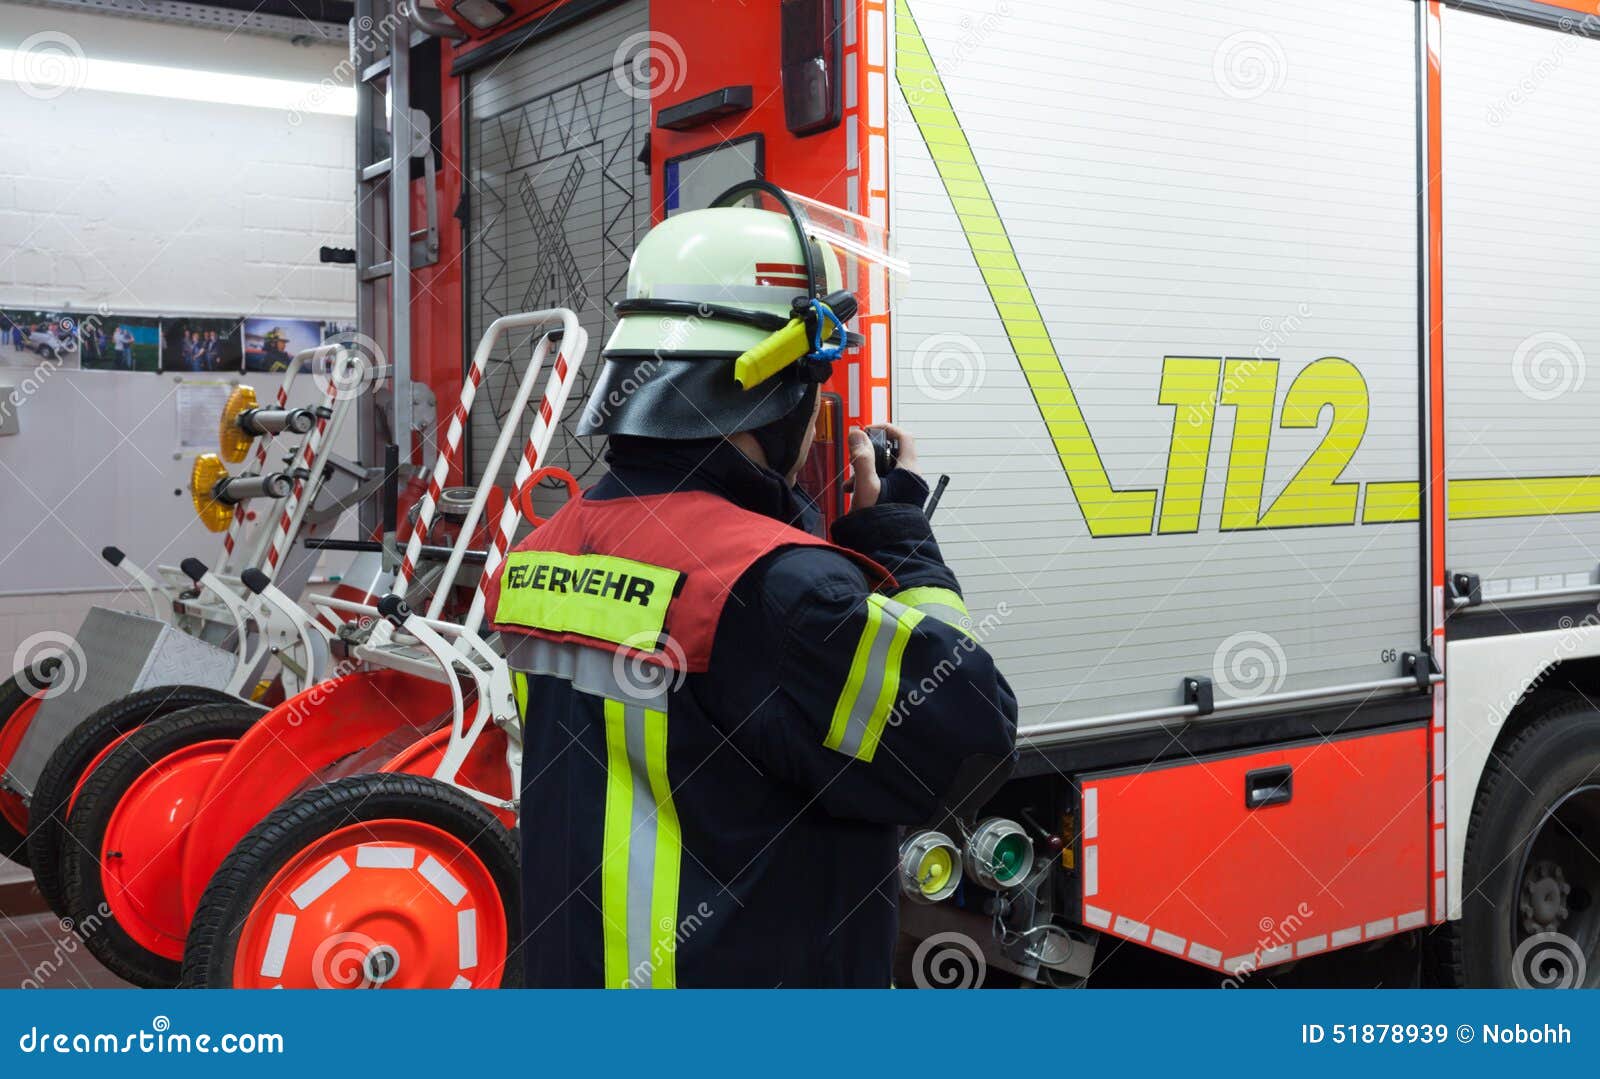 fireman in a fire department fire truck spark with radios set